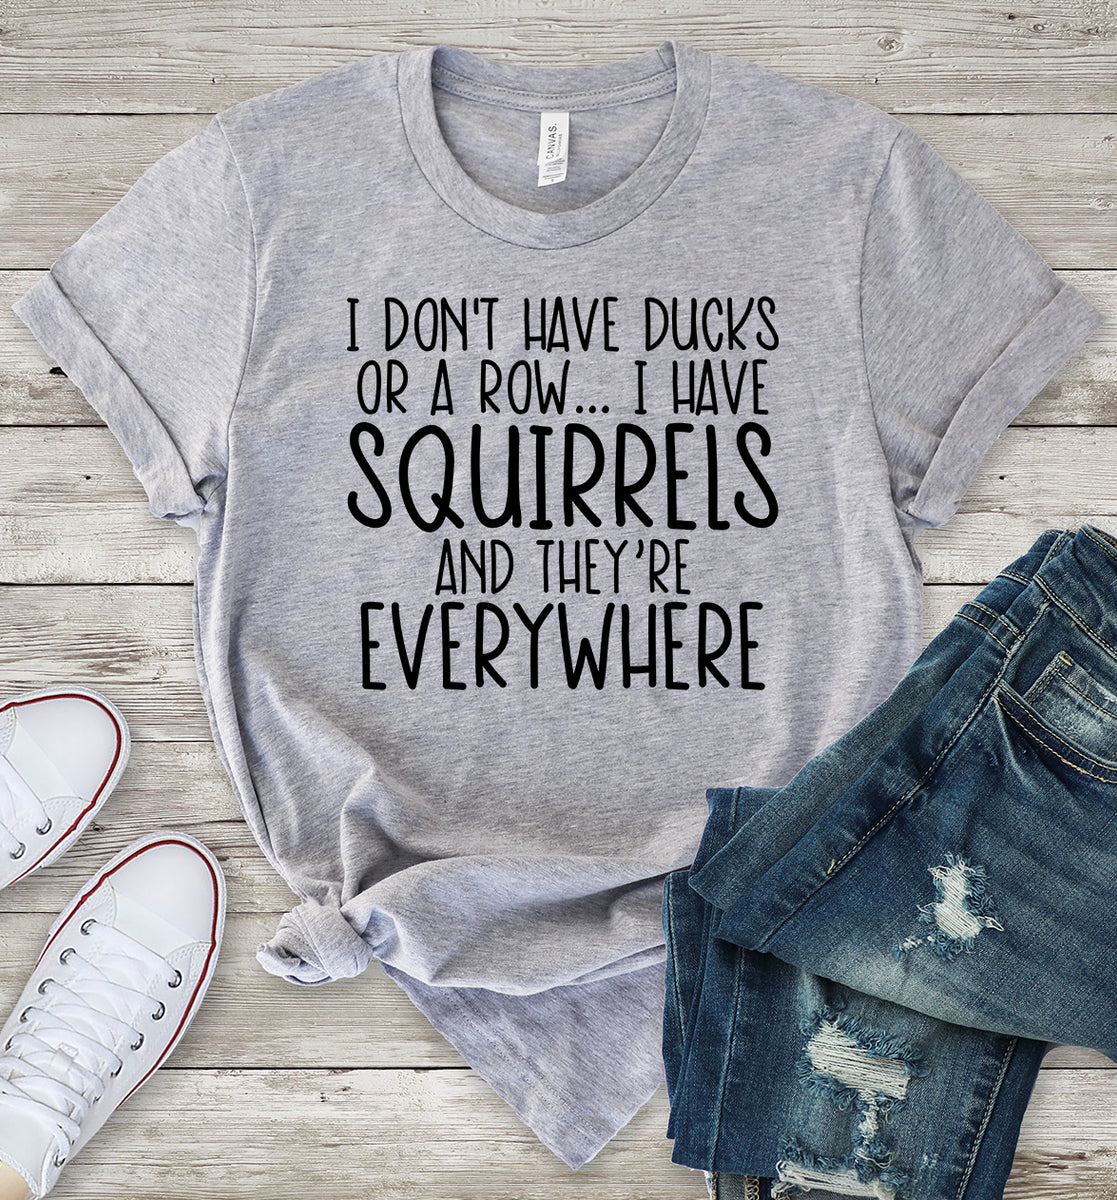 I Don't Have Ducks or a Row... I Have Squirrels and They're Everywhere Light Grey T-Shirt